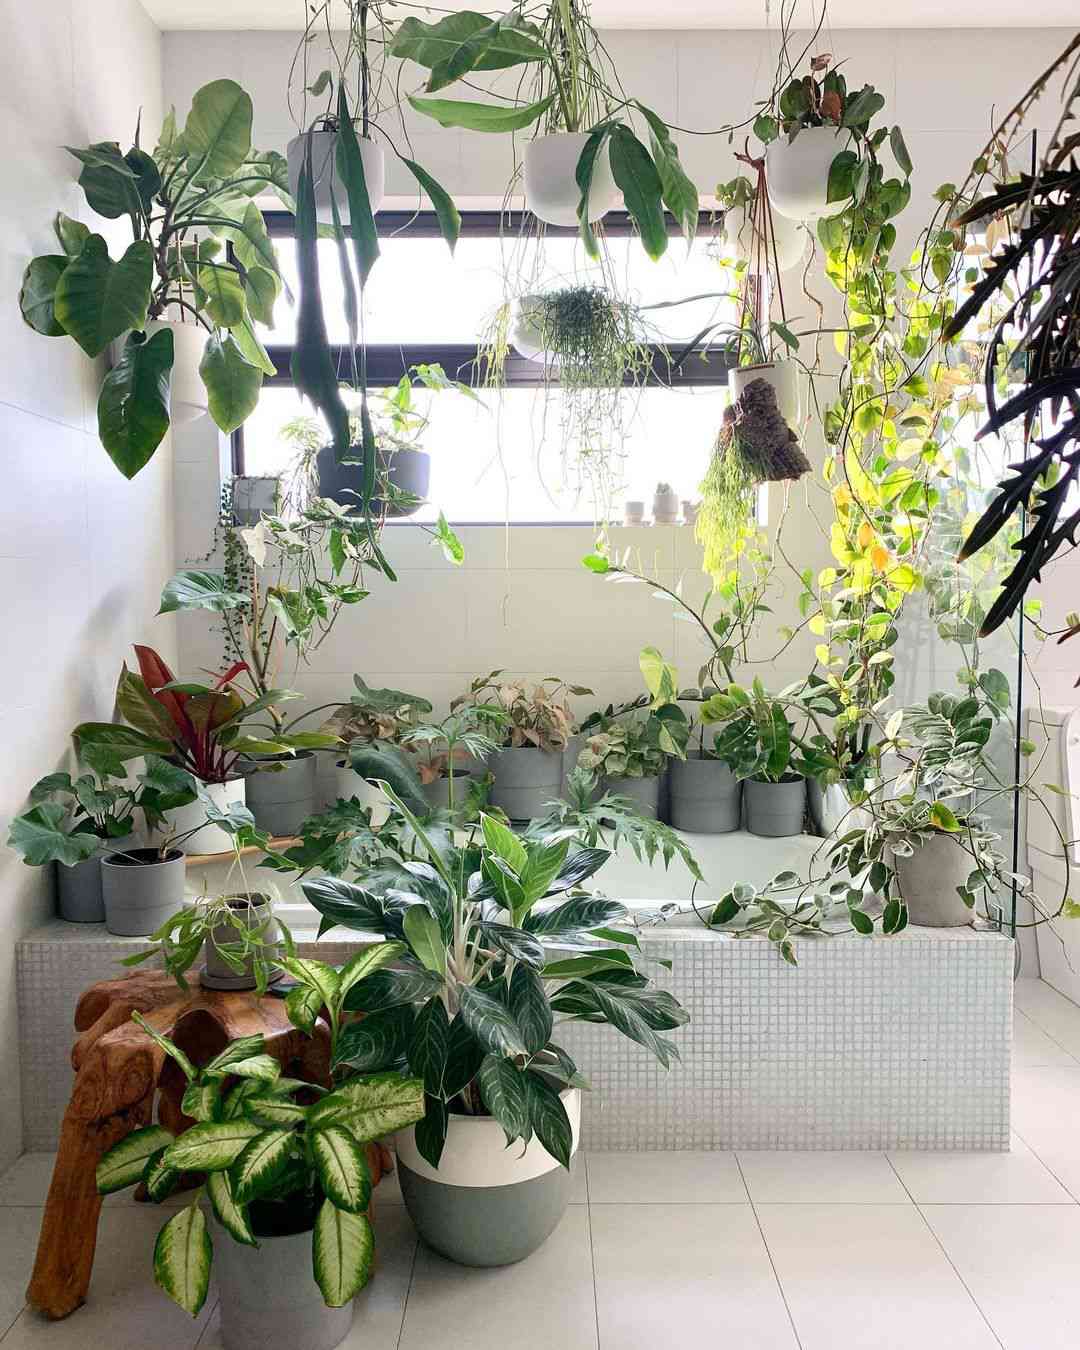 Exploring Creative Indoor Gardening Ideas: Captivating Images for Green Enthusiasts